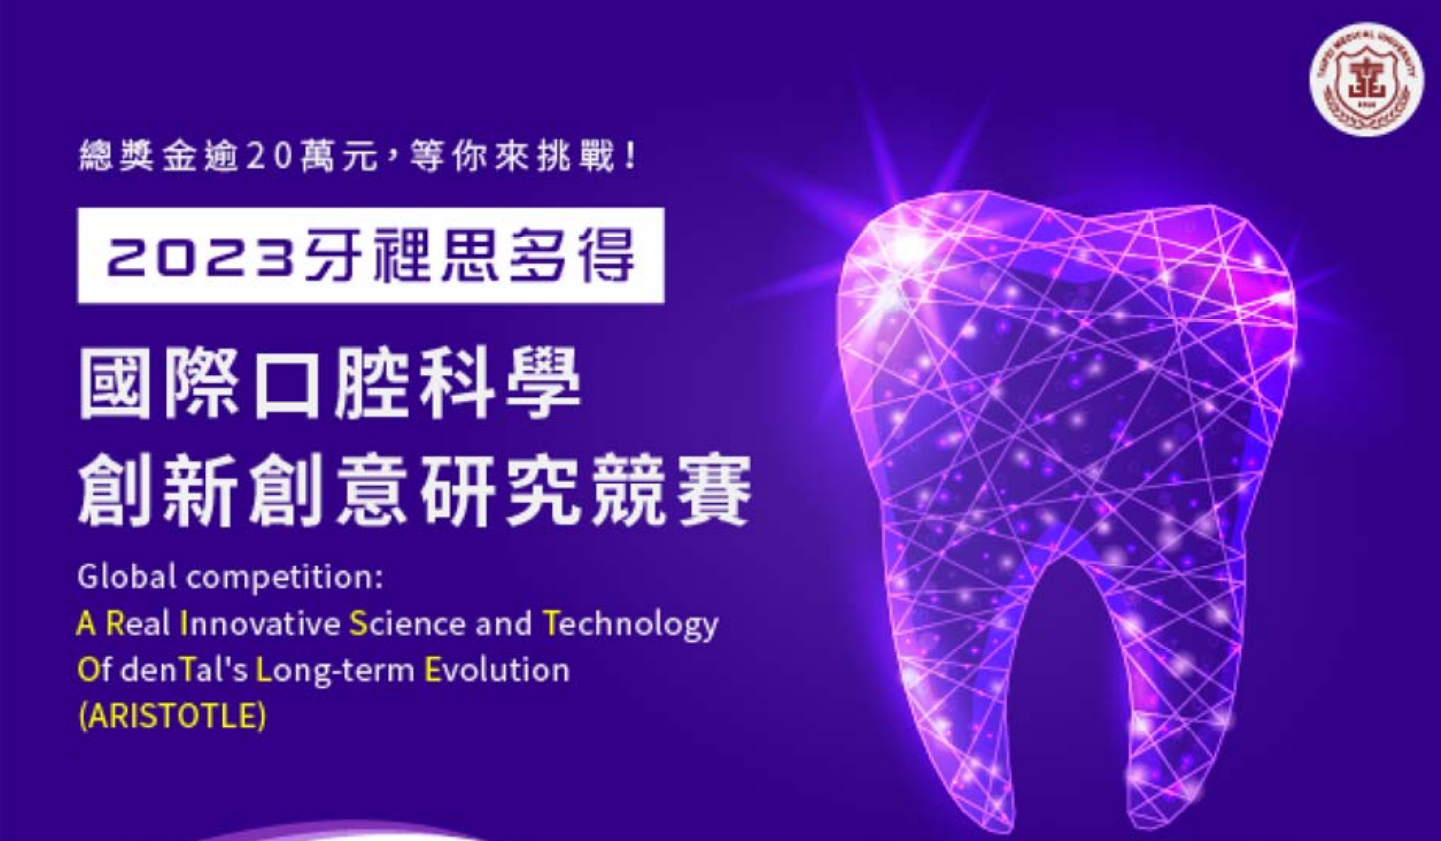 Featured image for “Taipei Medical University hosts the “2023 GALISDODE International Dental Science Innovation and Creativity Research Competition”. Please refer to the attached file for the competition poster and methods. Interested teachers and students are welcome to sign up.”